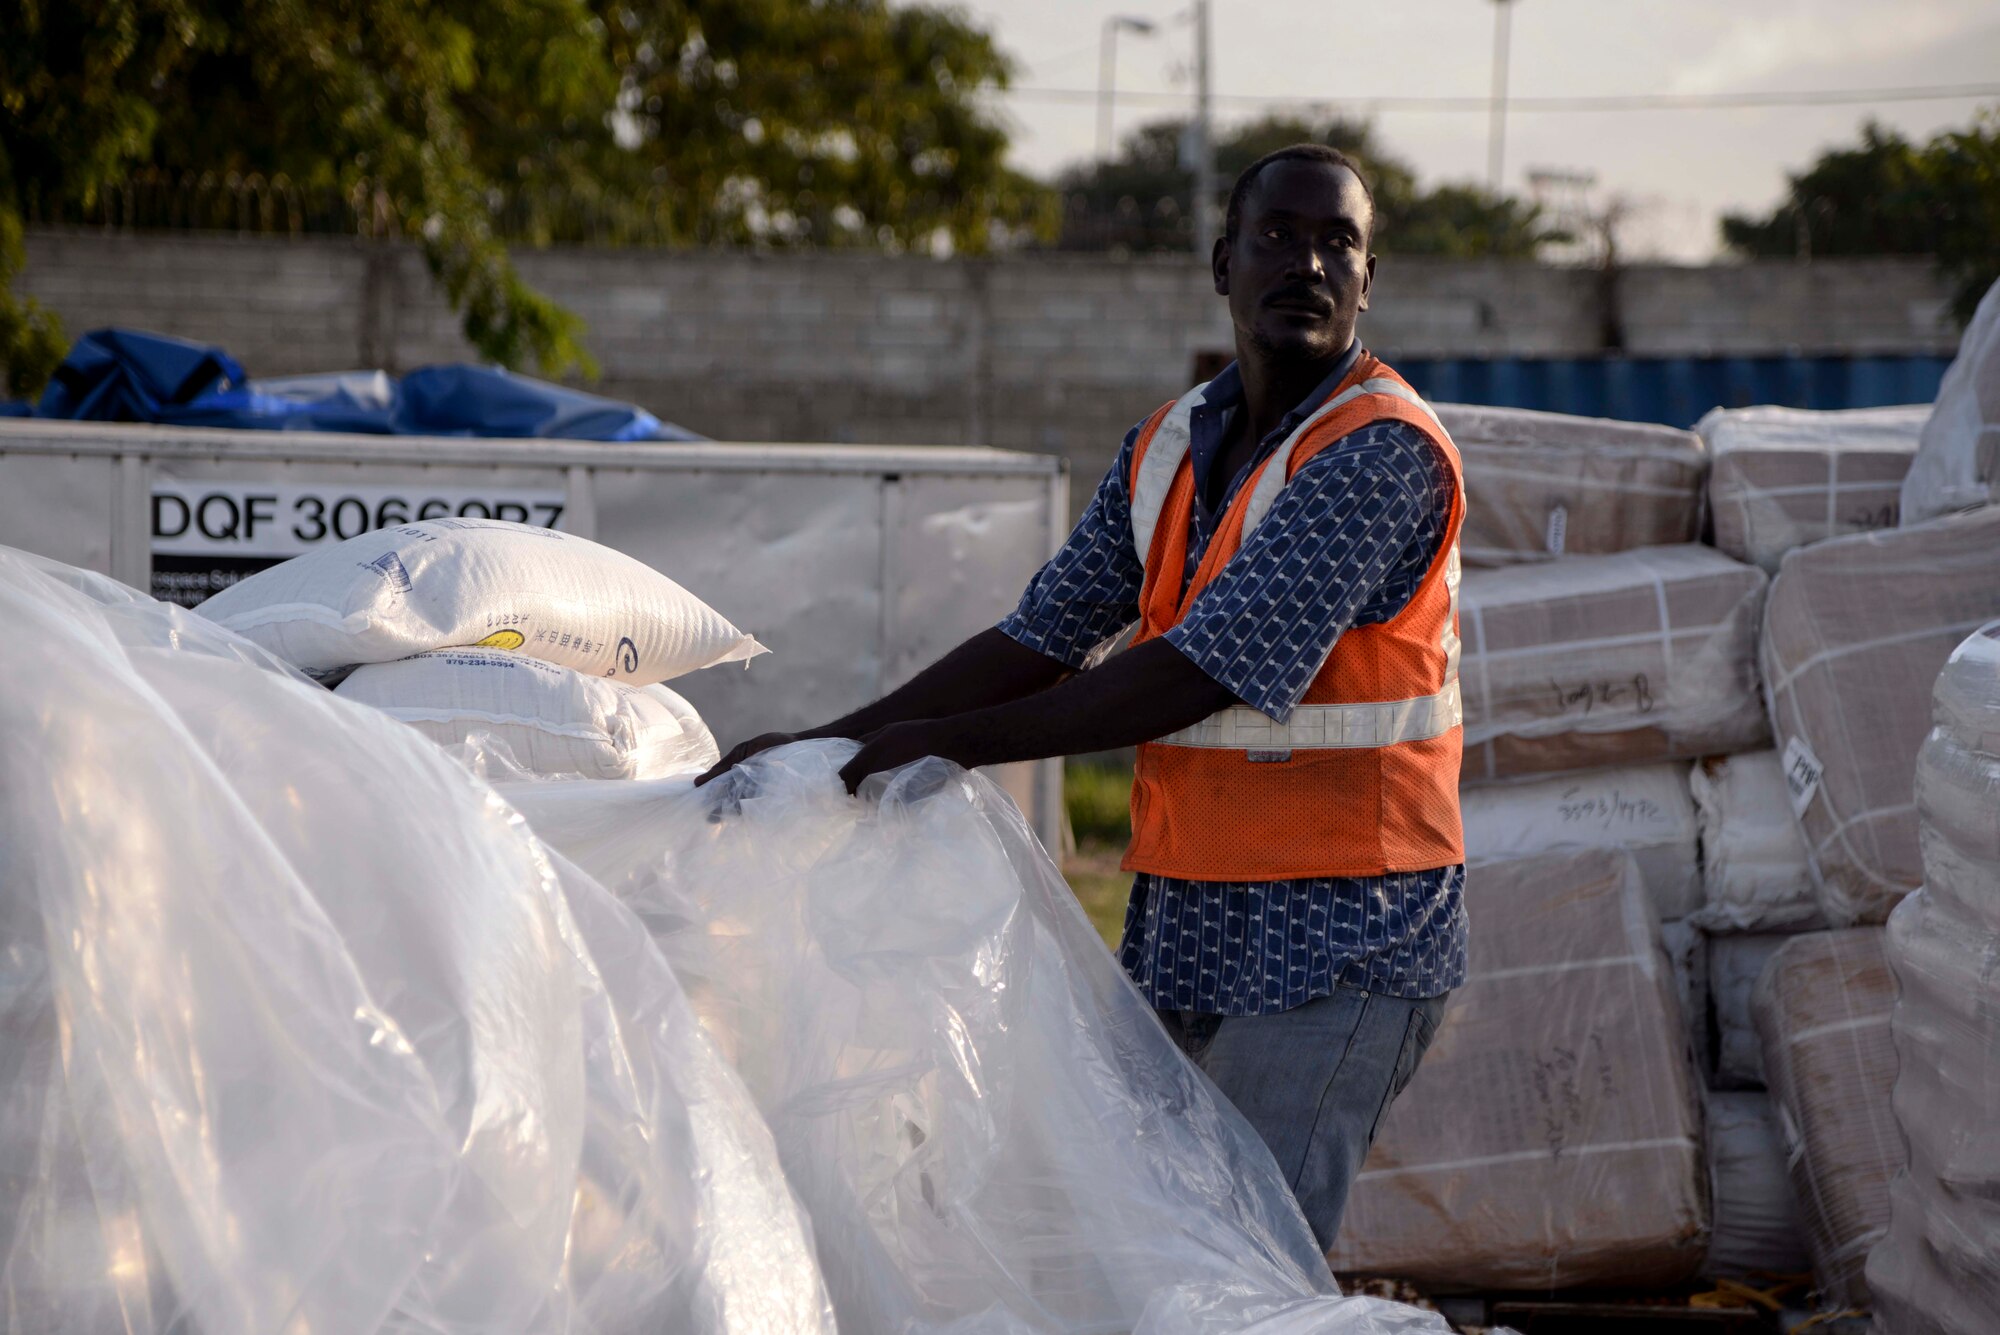 Port-au-Prince, Haiti – A Haitian citizen opens up a pallet of sacks of rice at Port-au-Prince, Haiti Dec. 19, 2013. Airmen assigned to the 97th Air Mobility Wing executed a humanitarian aid mission to deliver 136,000 pounds of rice, beans and corn meal that was provided by Operation Ukraine, a non-profit relief organization that collects and distributes supplies around the world. (U.S. Air Force photo by Airman 1st Class Klynne Pearl Serrano/Released)